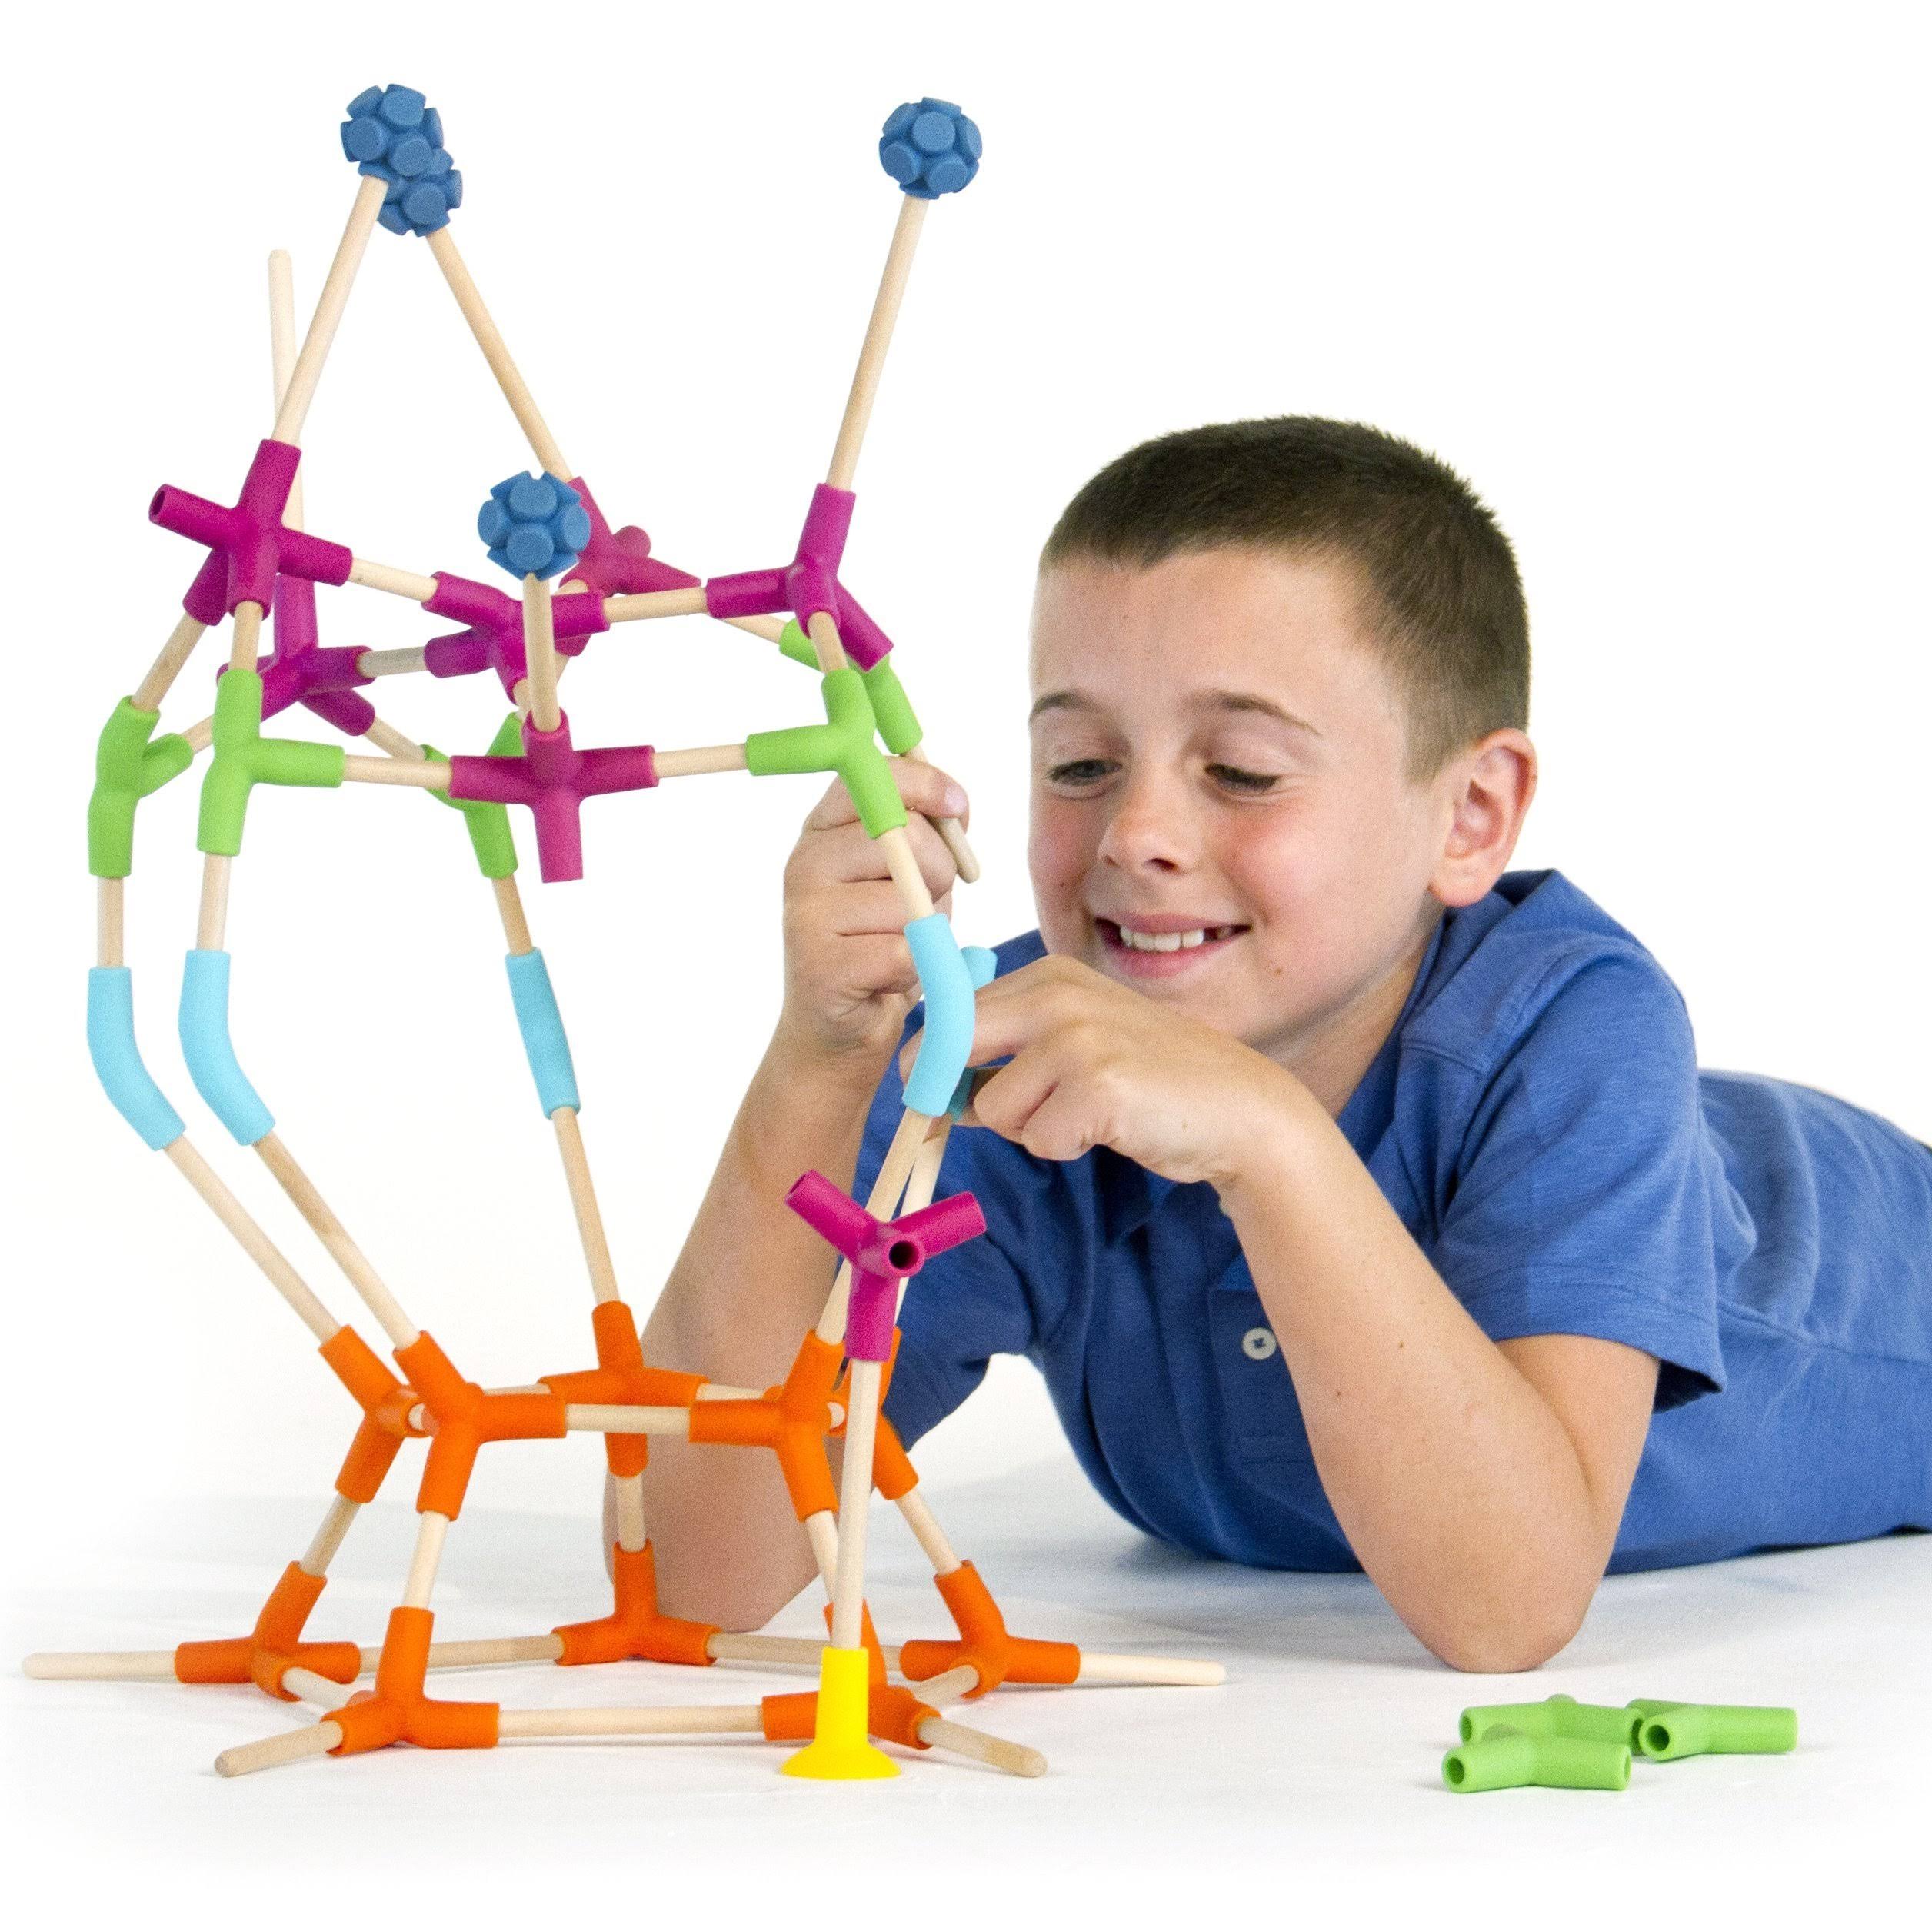 Fat Brain Toys Joinks Construction Toy Kit